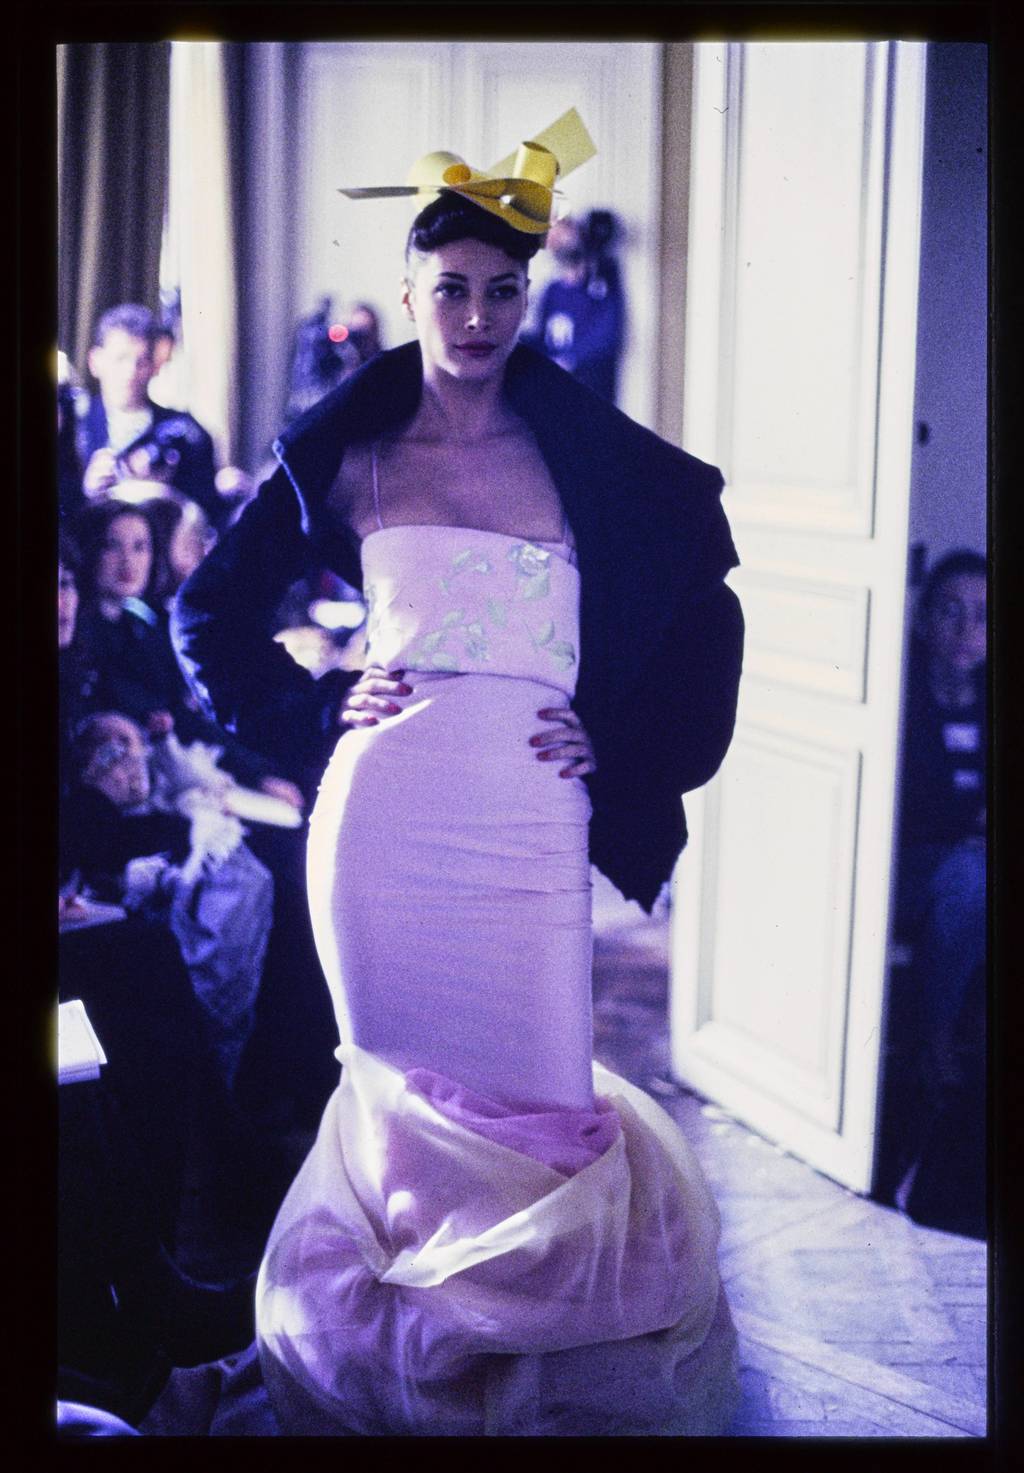 Tim Blanks’ Top Fashion Shows of All-Time: John Galliano, Ready-to-Wear ...